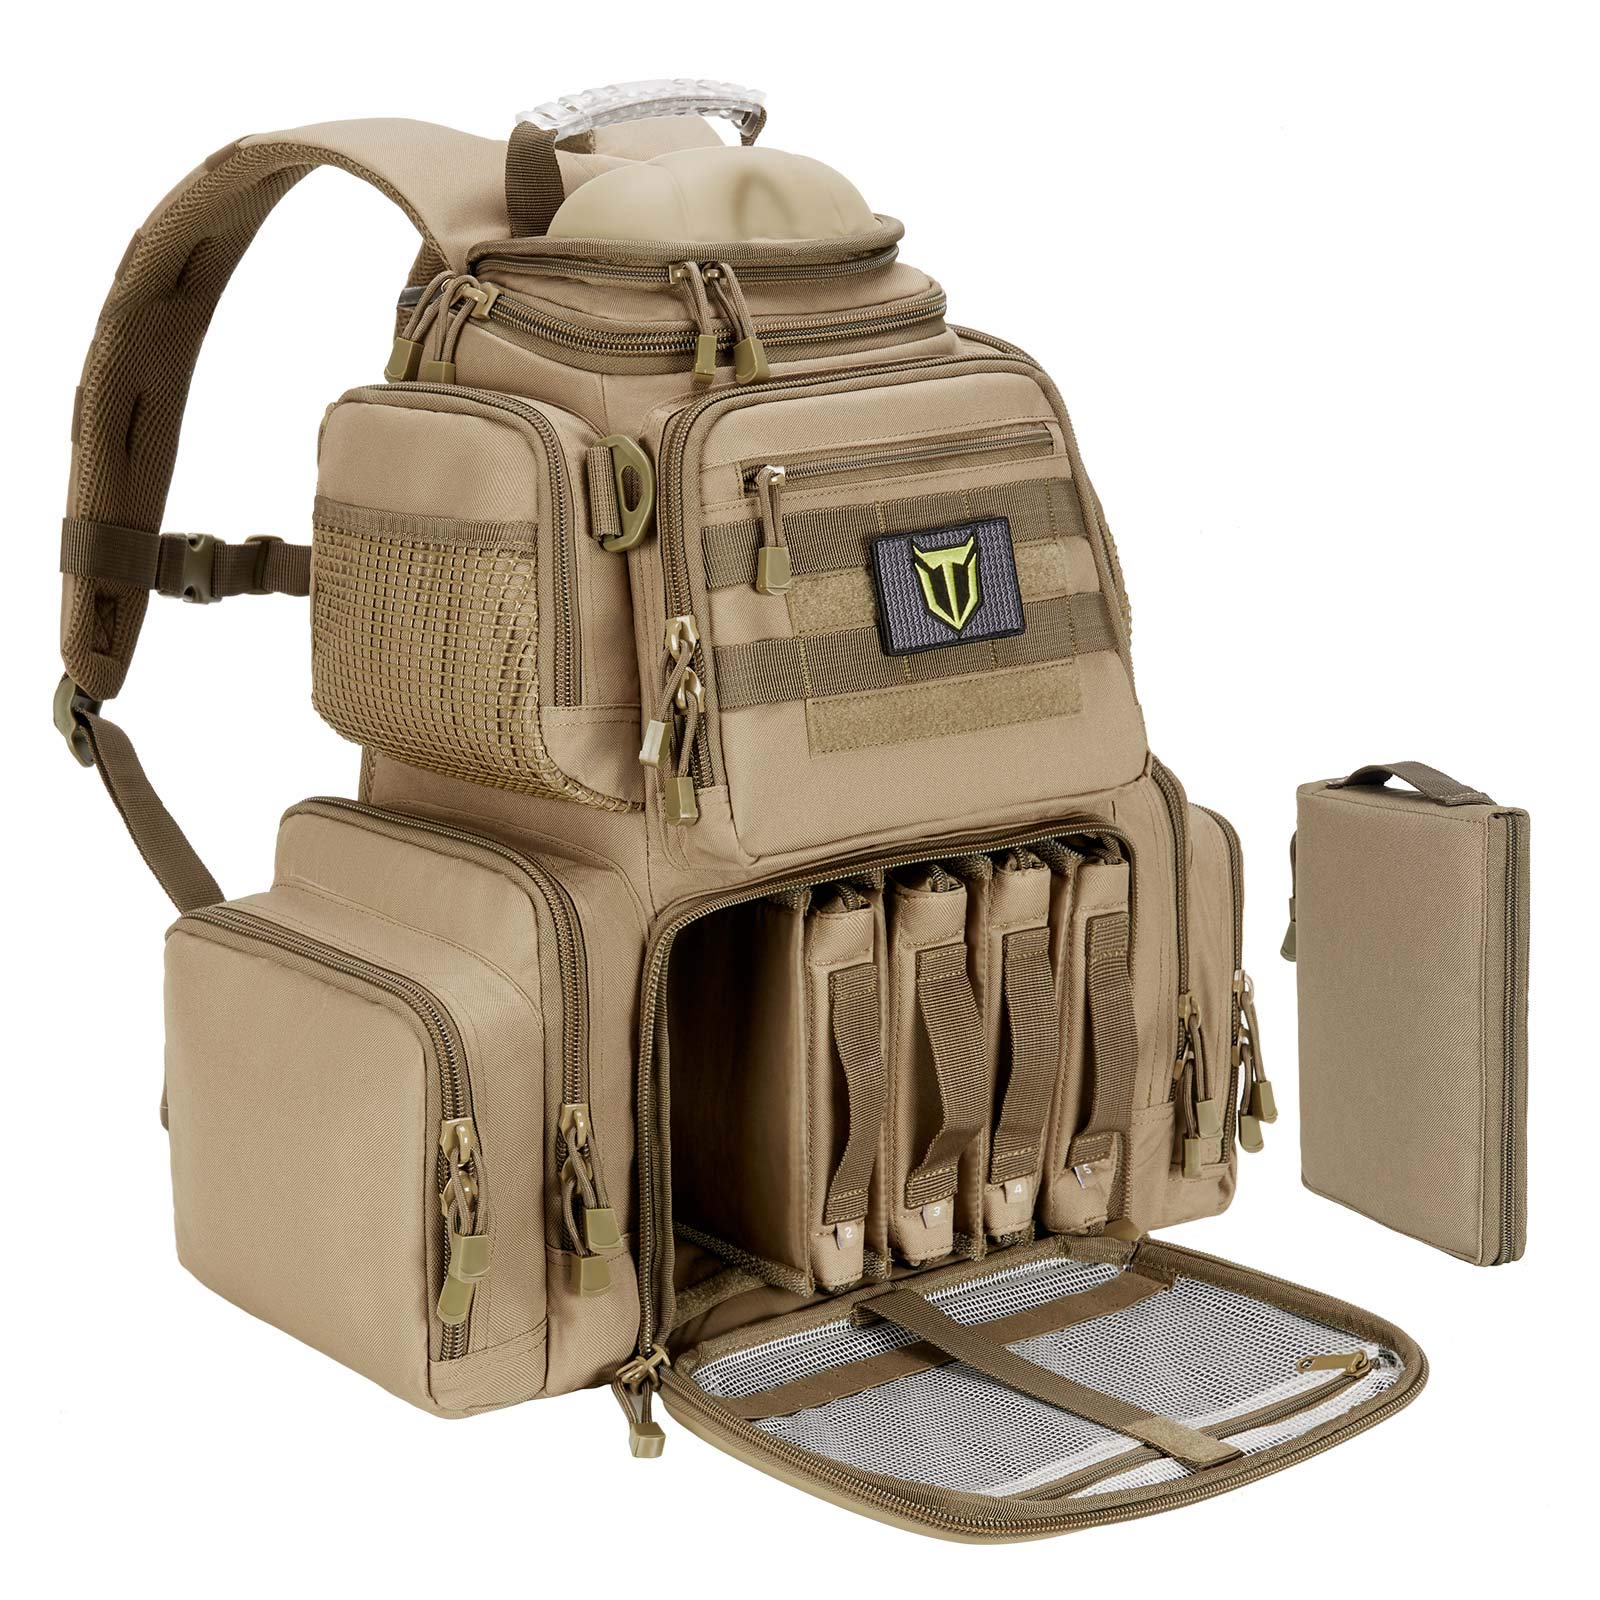 TIDEWE Tactical Range Backpack Bag for Gun and Ammo with Pistol Case